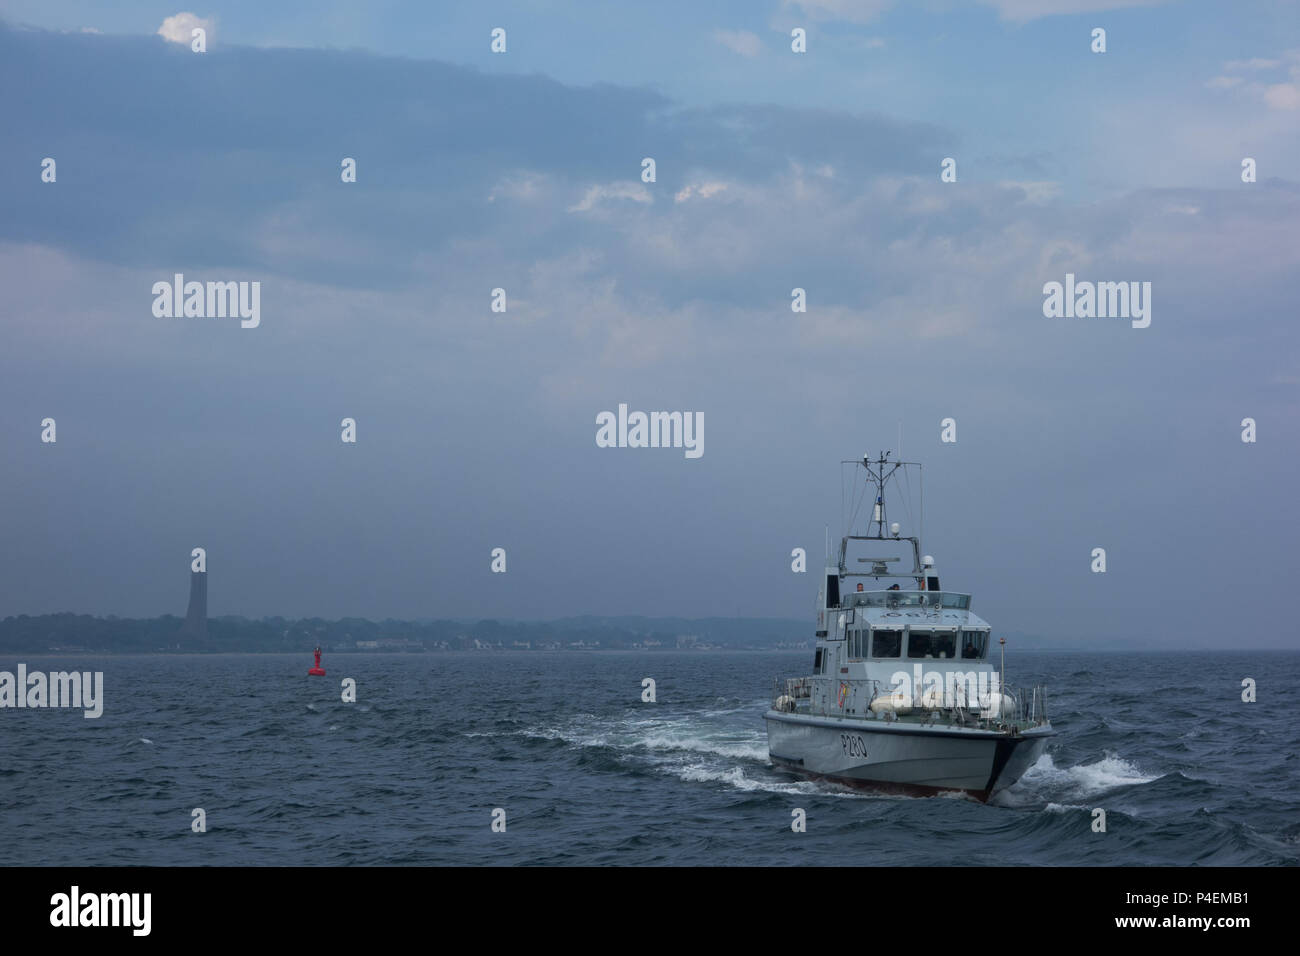 A Starboard side view of The Archer Class Patrol Vessel HMS Dasher P280, in transit in the North sea near the Baltic. Stock Photo